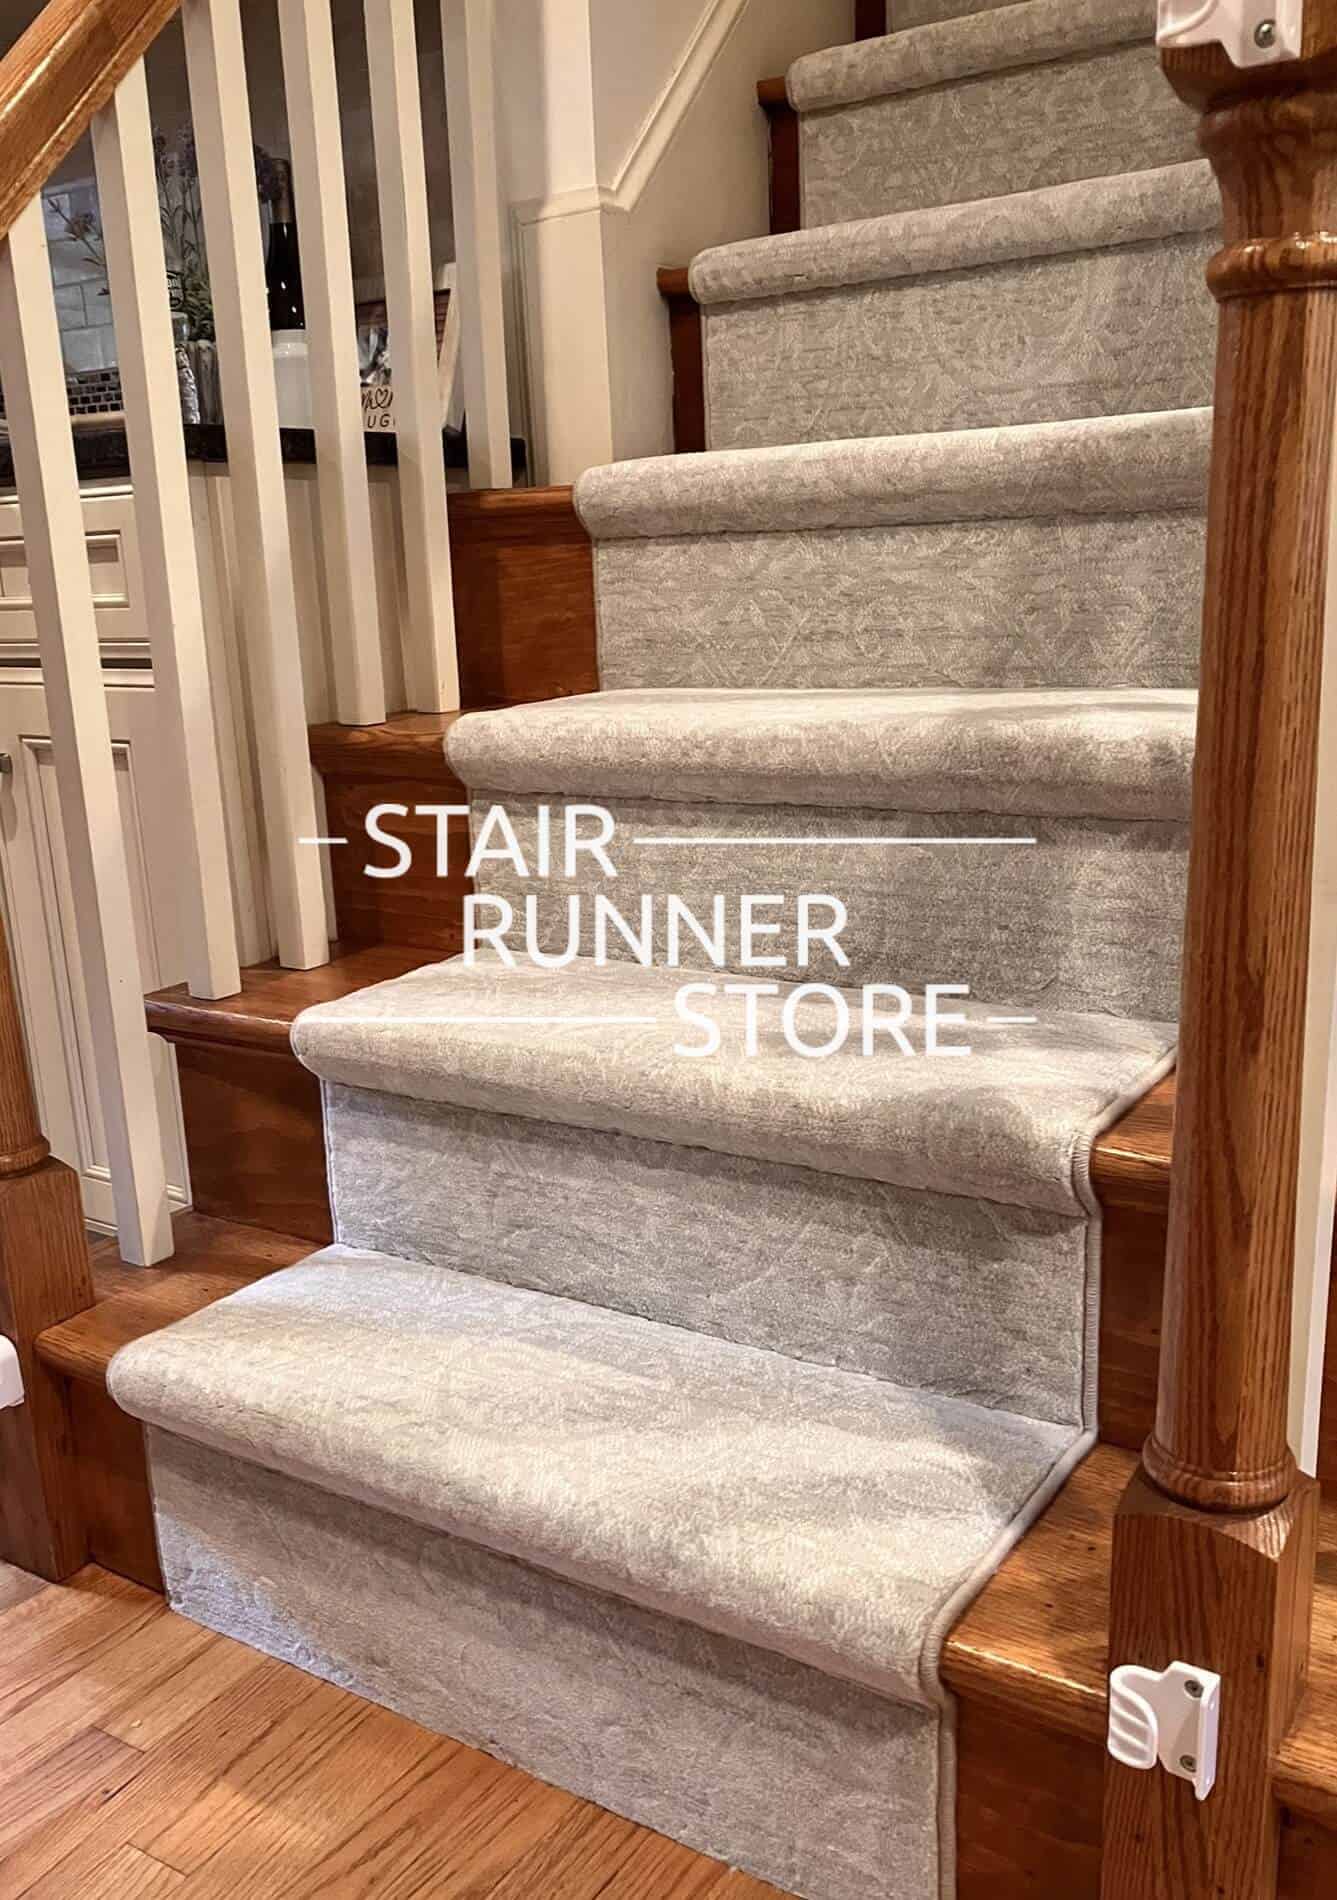 Imperial Stair Runner Installation 12148 GREY, Inspiration Gallery By Stair Runner Store